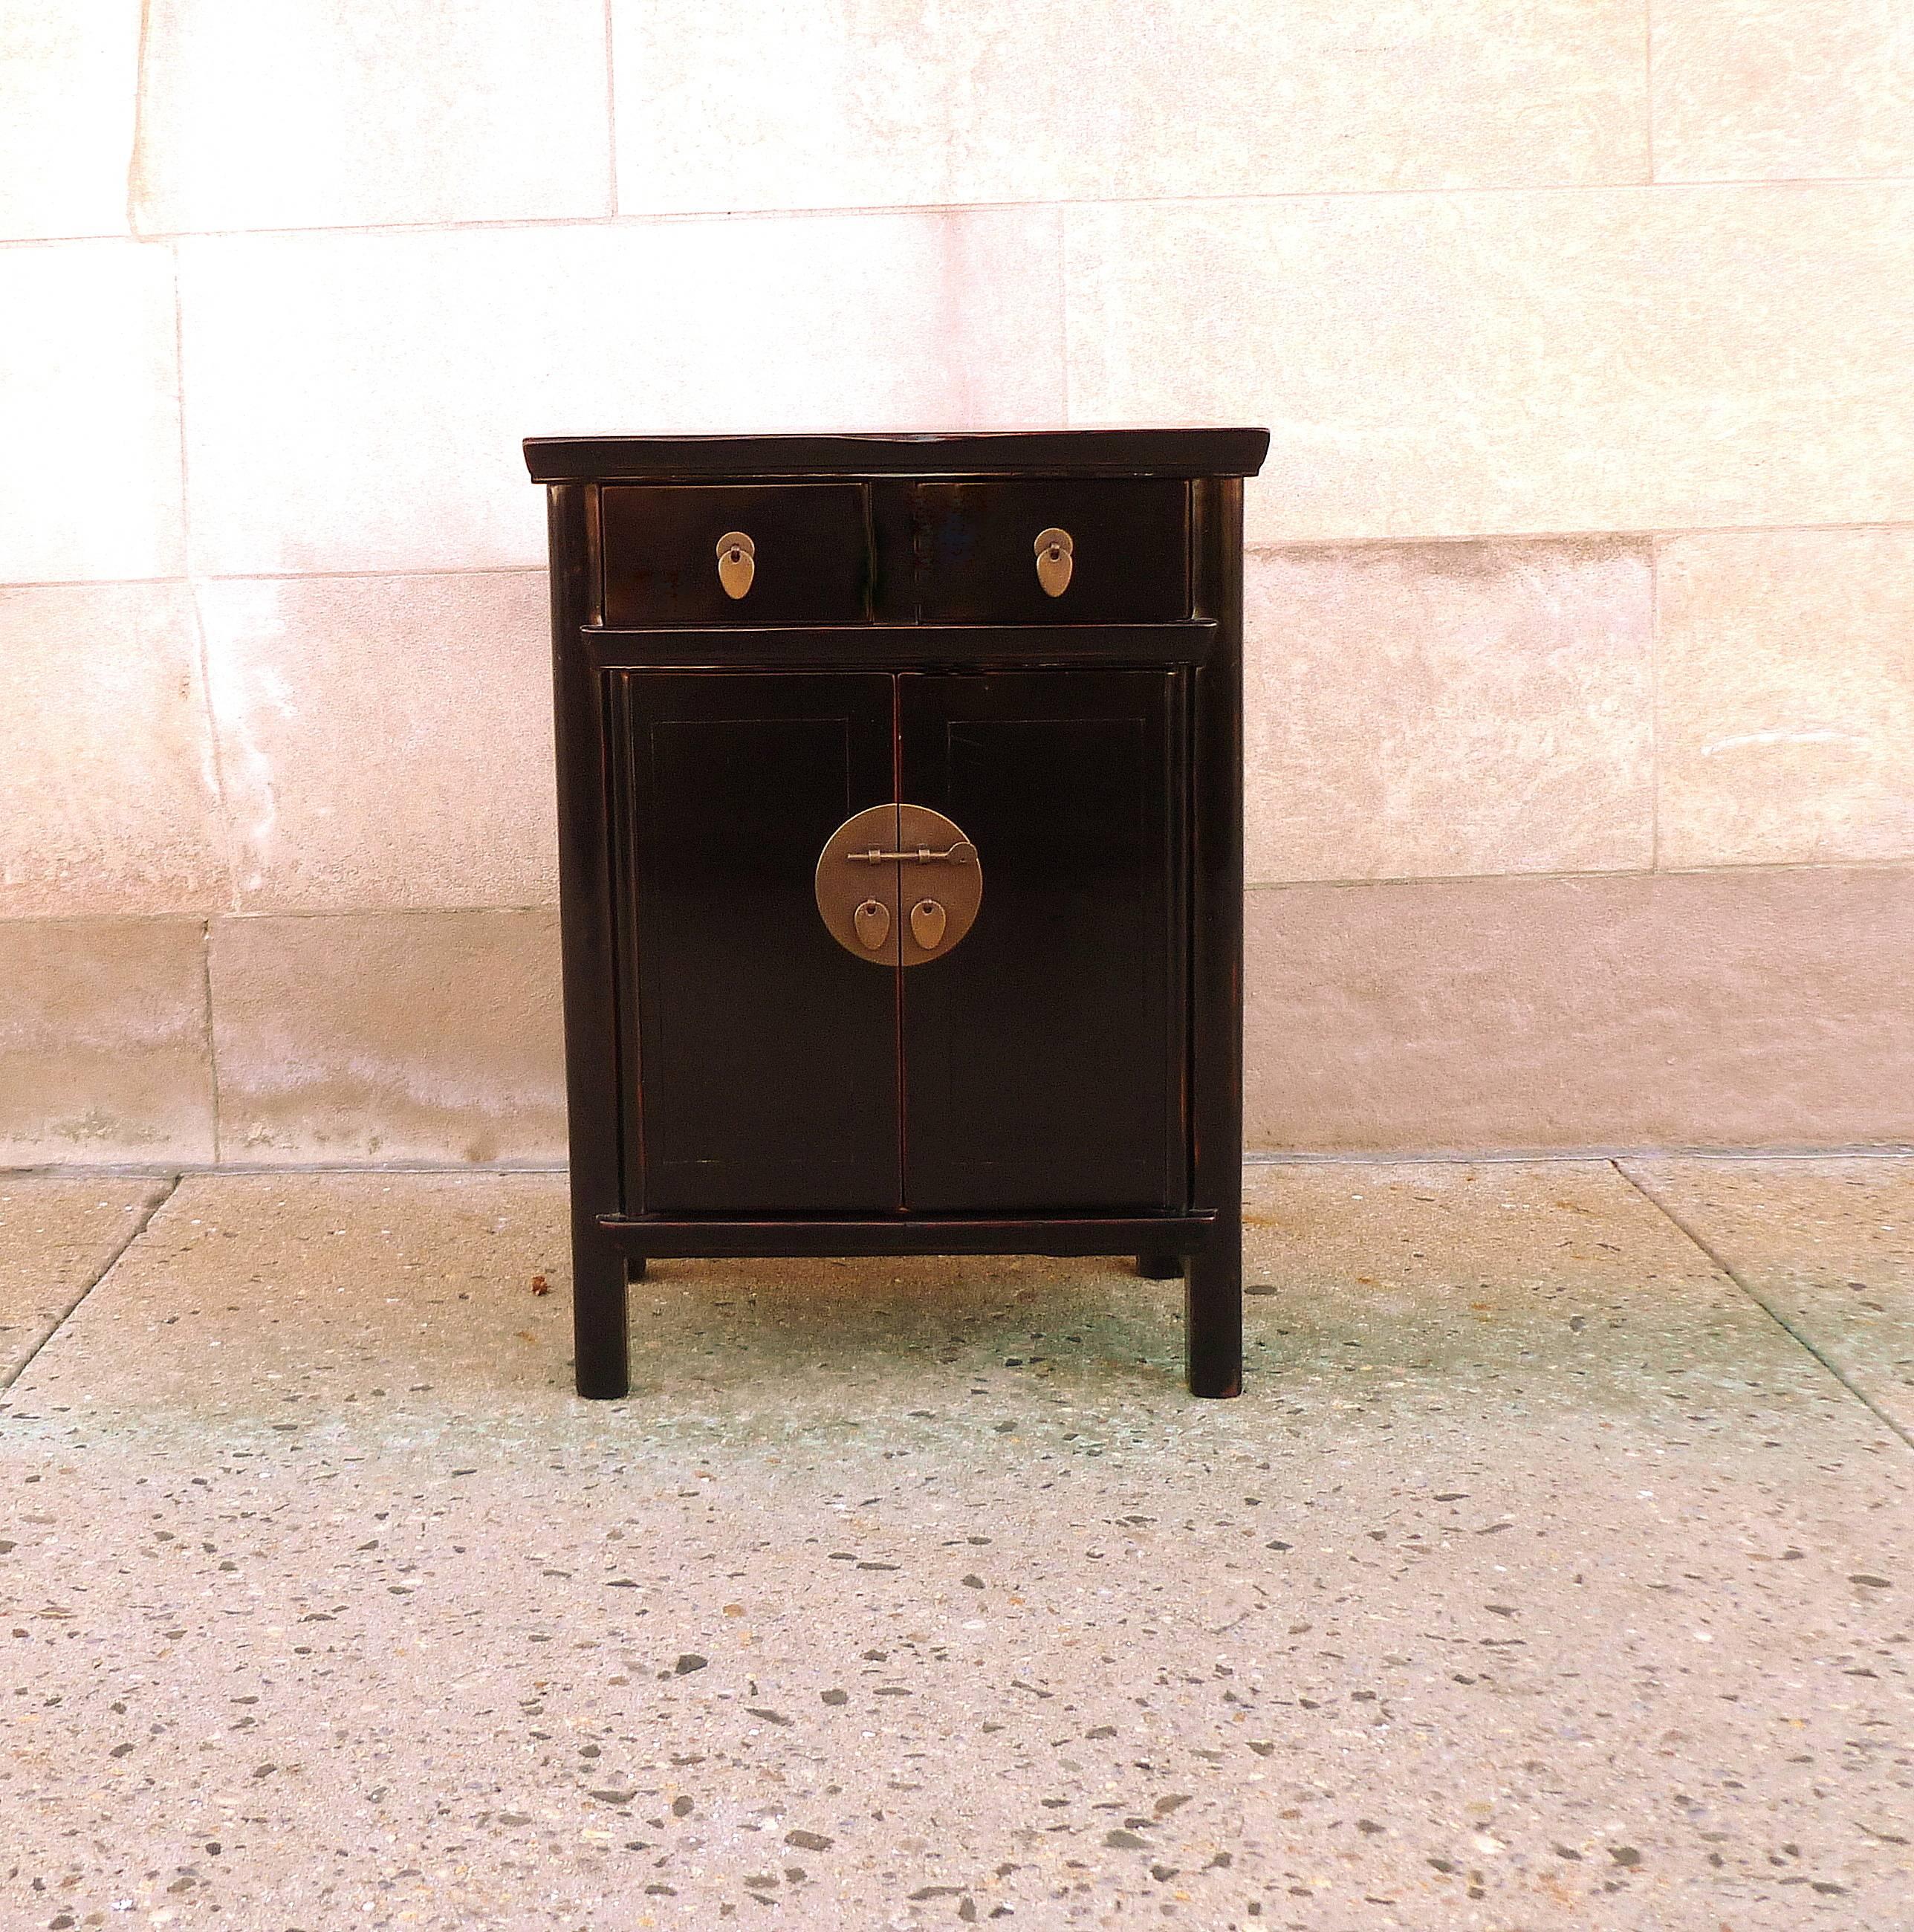 Fine black lacquer chest with two drawers and a pair of open doors. Simple and elegant. Beautiful color and form.